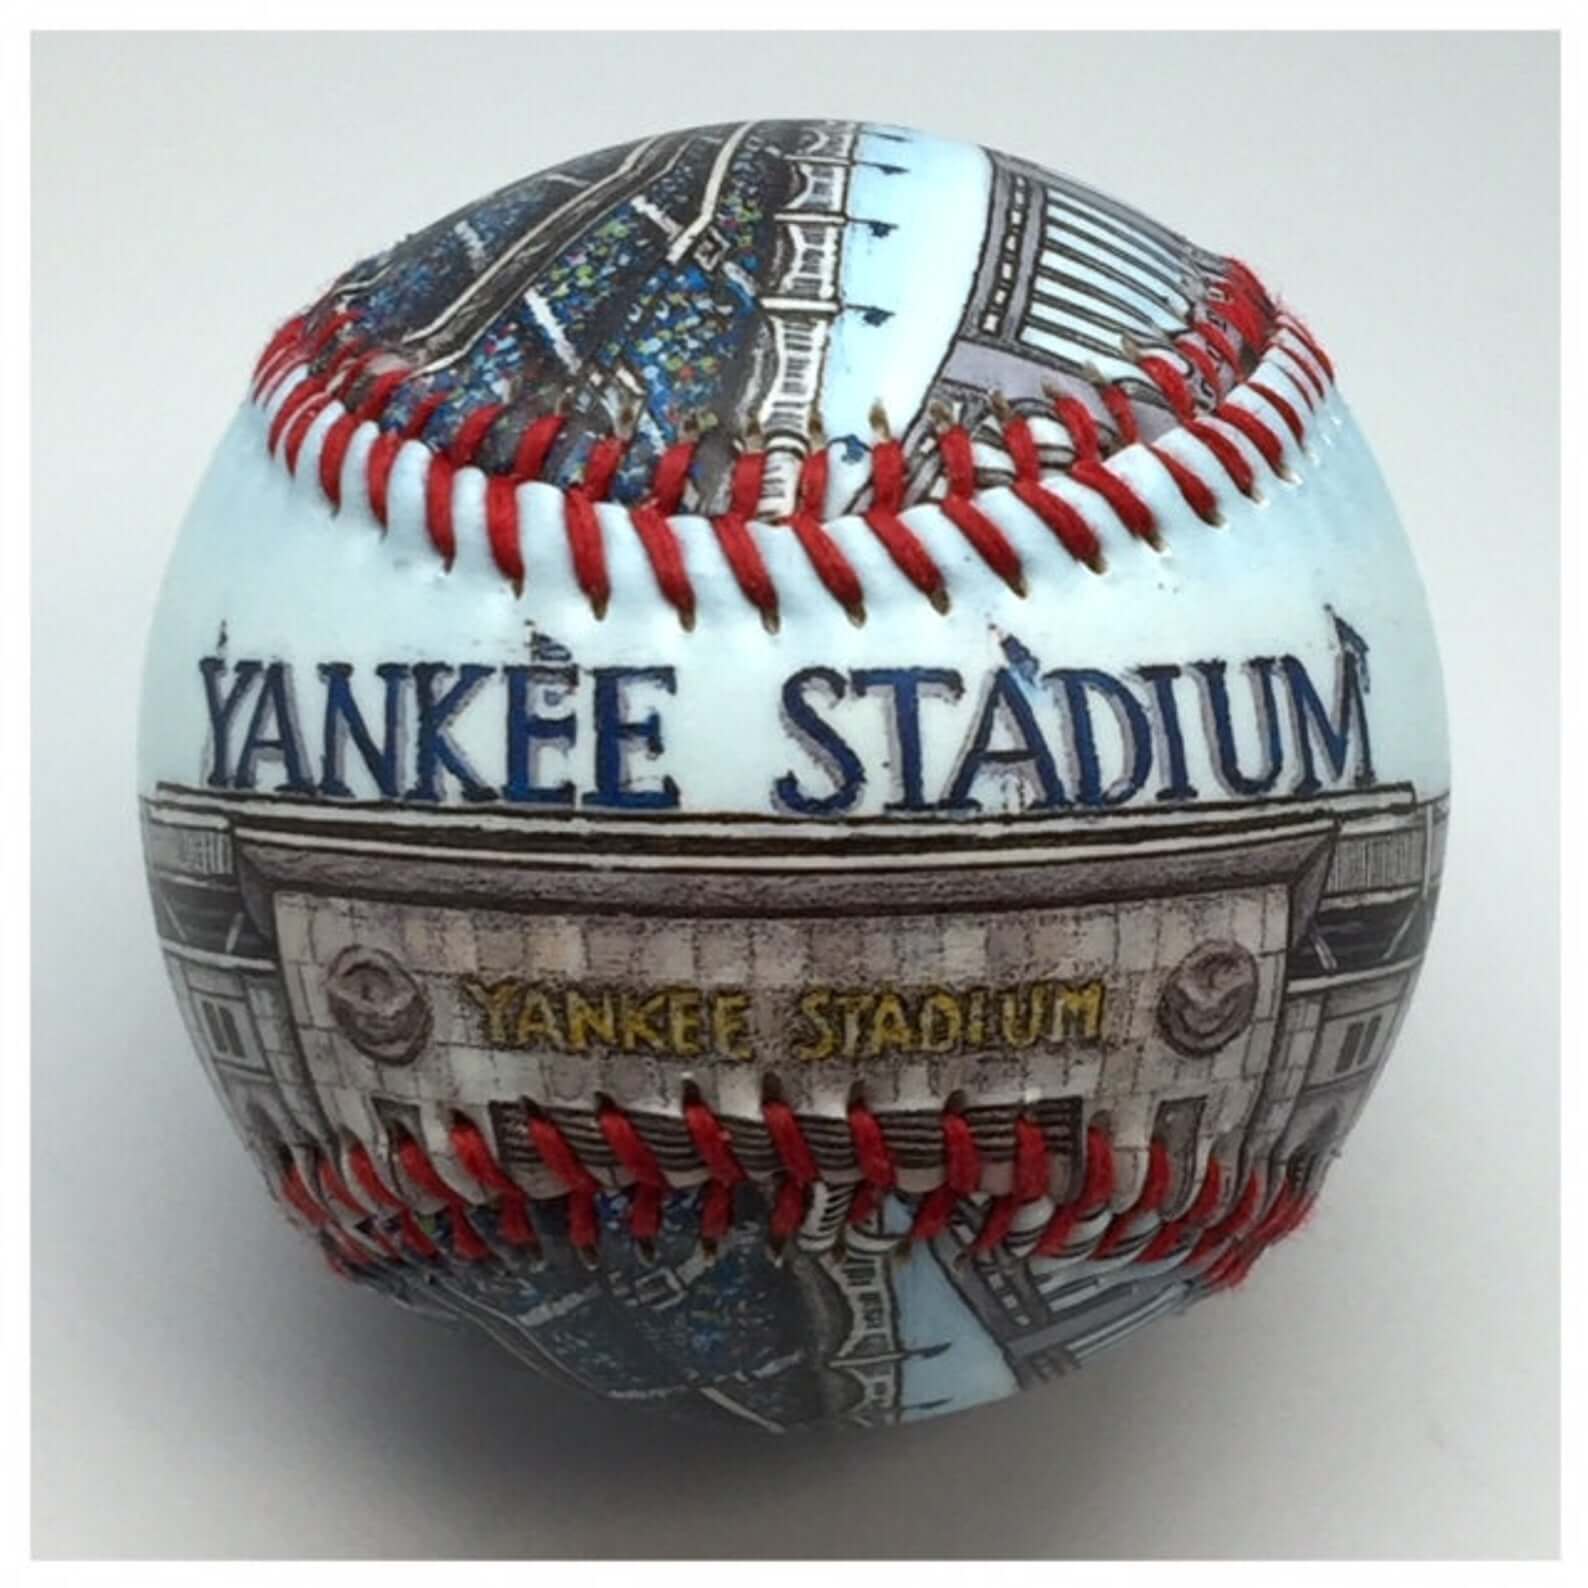 30 Great Creative Gifts For Baseball Fans Sports Management Degree Guide